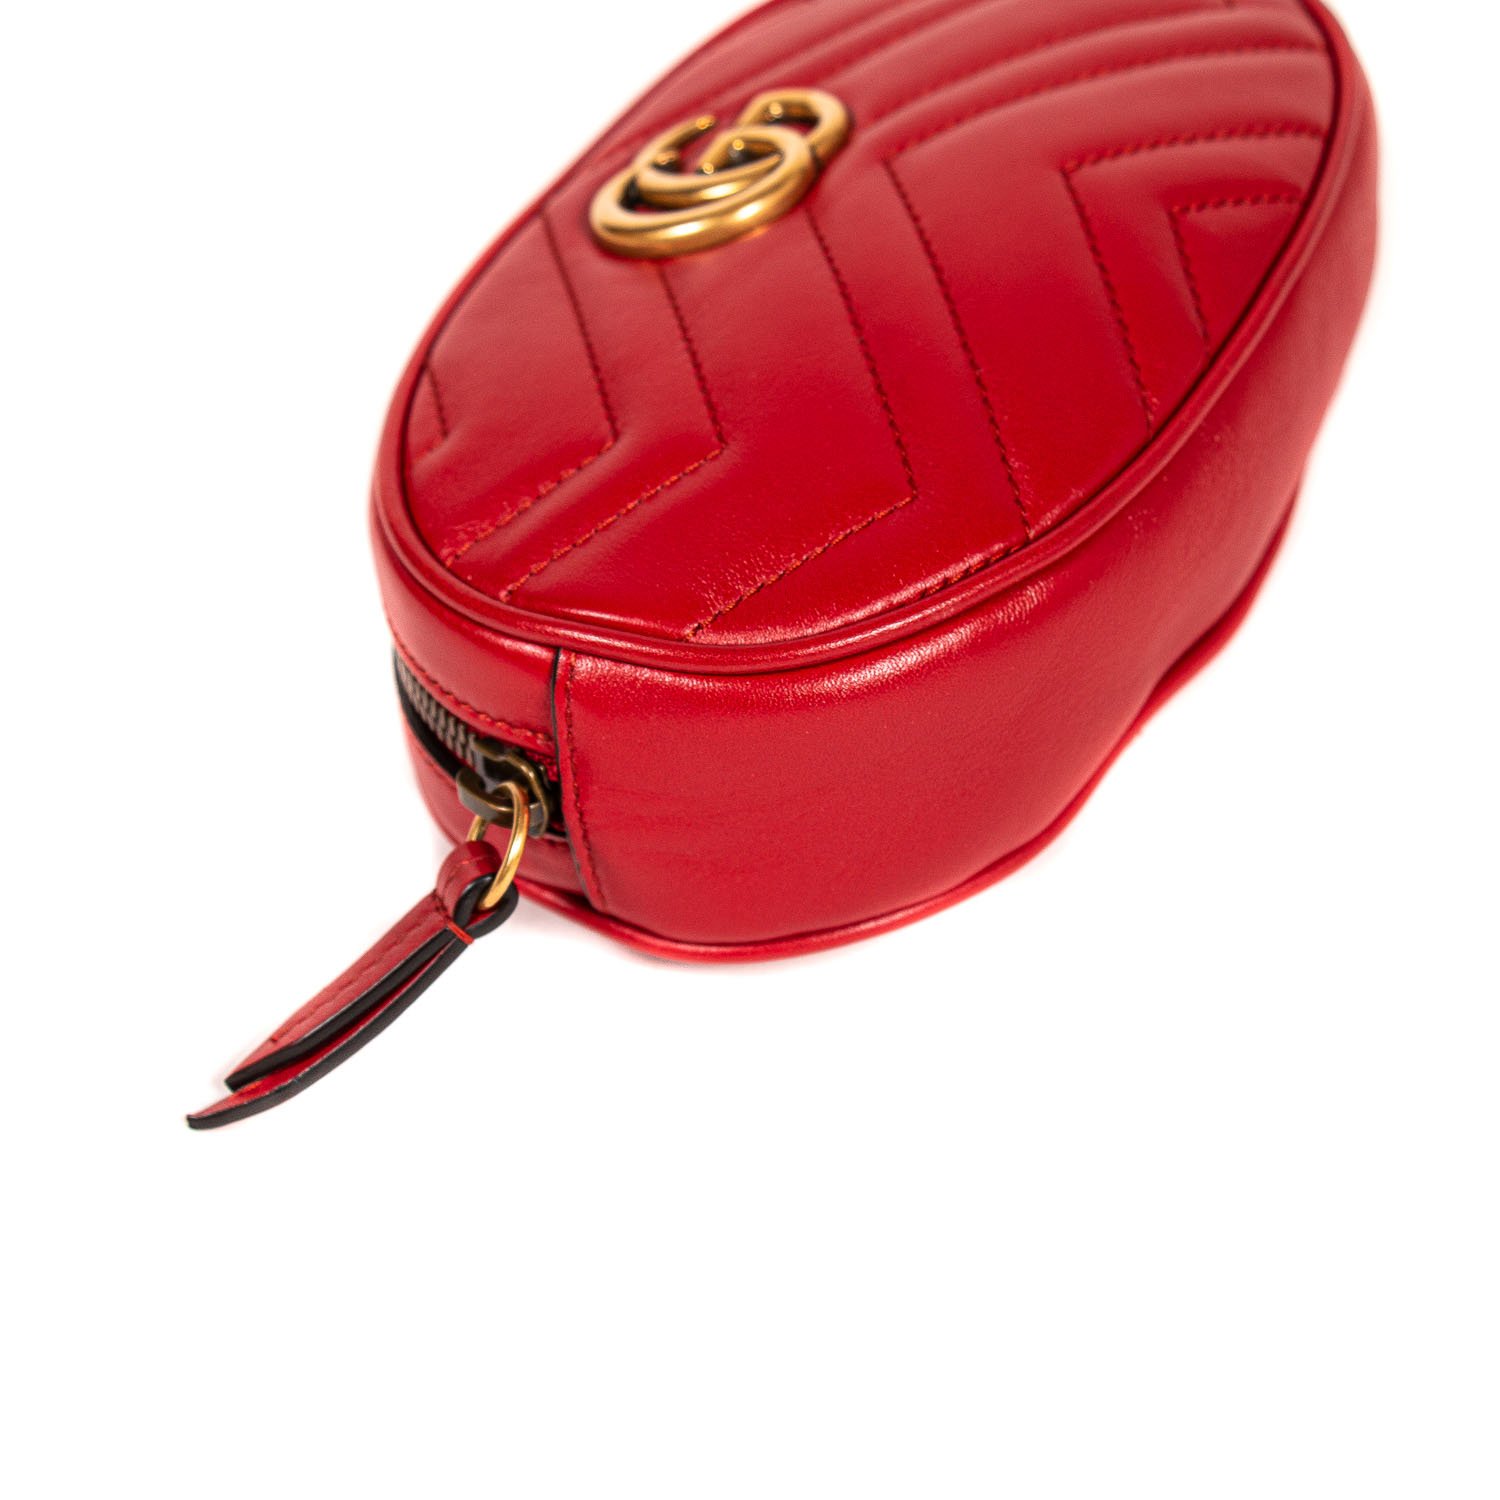 Gucci Red Leather GG Marmont Belt Bag